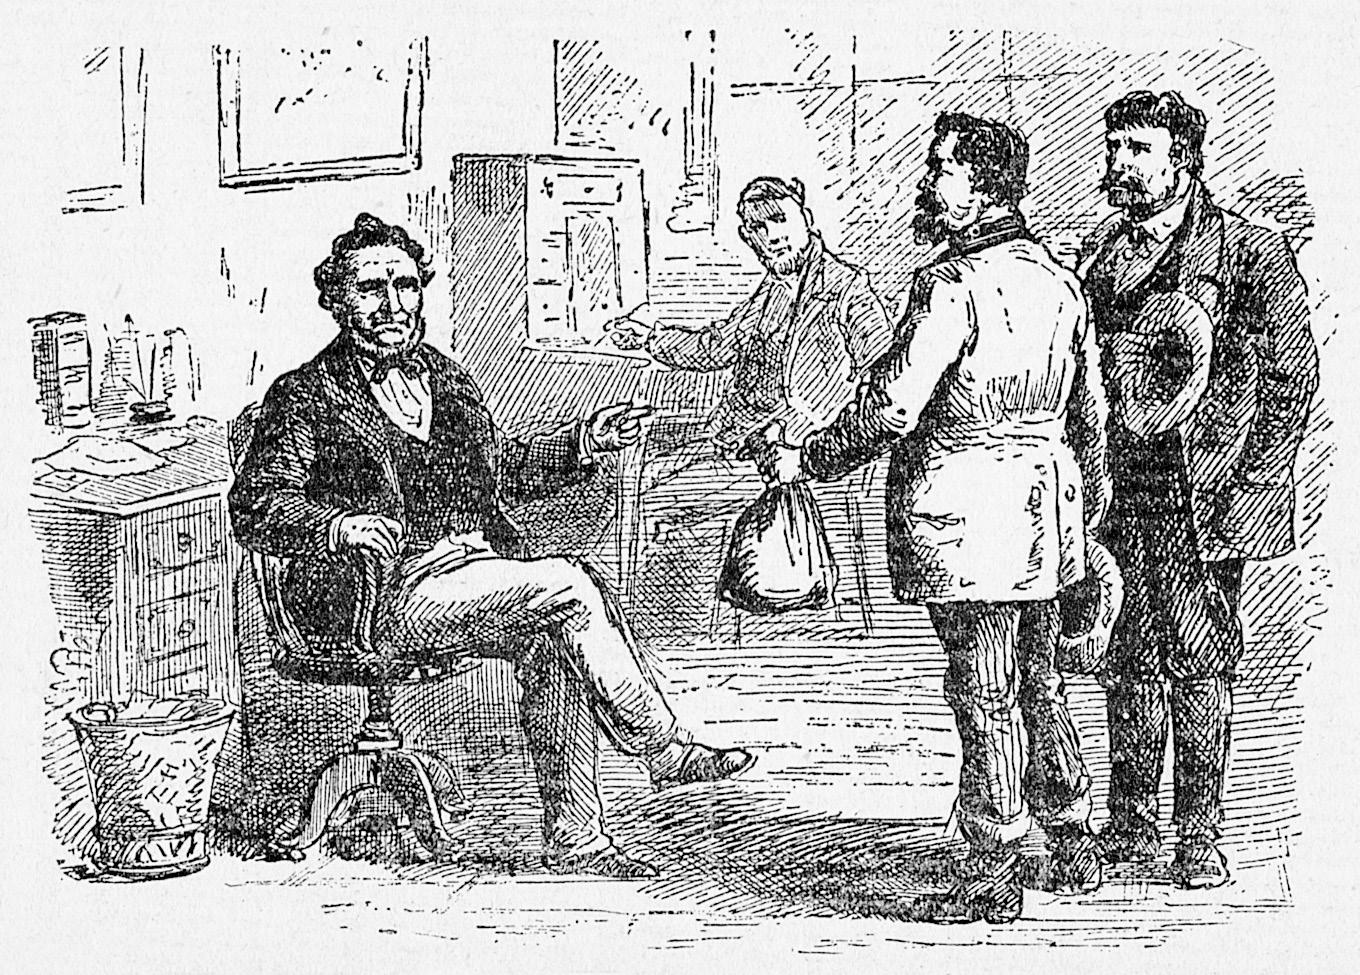 Lt. William A. Hickman delivers cash stripped from ammunition trader Richard E. Yates, Brigham Young’s Office, October 1857. In a drawing illustrating his lurid 1872 memoirs, Brigham’s Destroying Angel, Hickman, a free-ranging officer in both the Nauvoo Legion and Standing Army, depicts his delivery of $900 in Yates’s gold to his leader as one of Young’s office clerks prepares a receipt. Hickman claimed that his plea for a share of this cash was rebuffed, with Young ruling “it must go towards defraying the expense of the war.” Both men were later indicted (but never tried) for Yates’s murder in Echo Canyon.